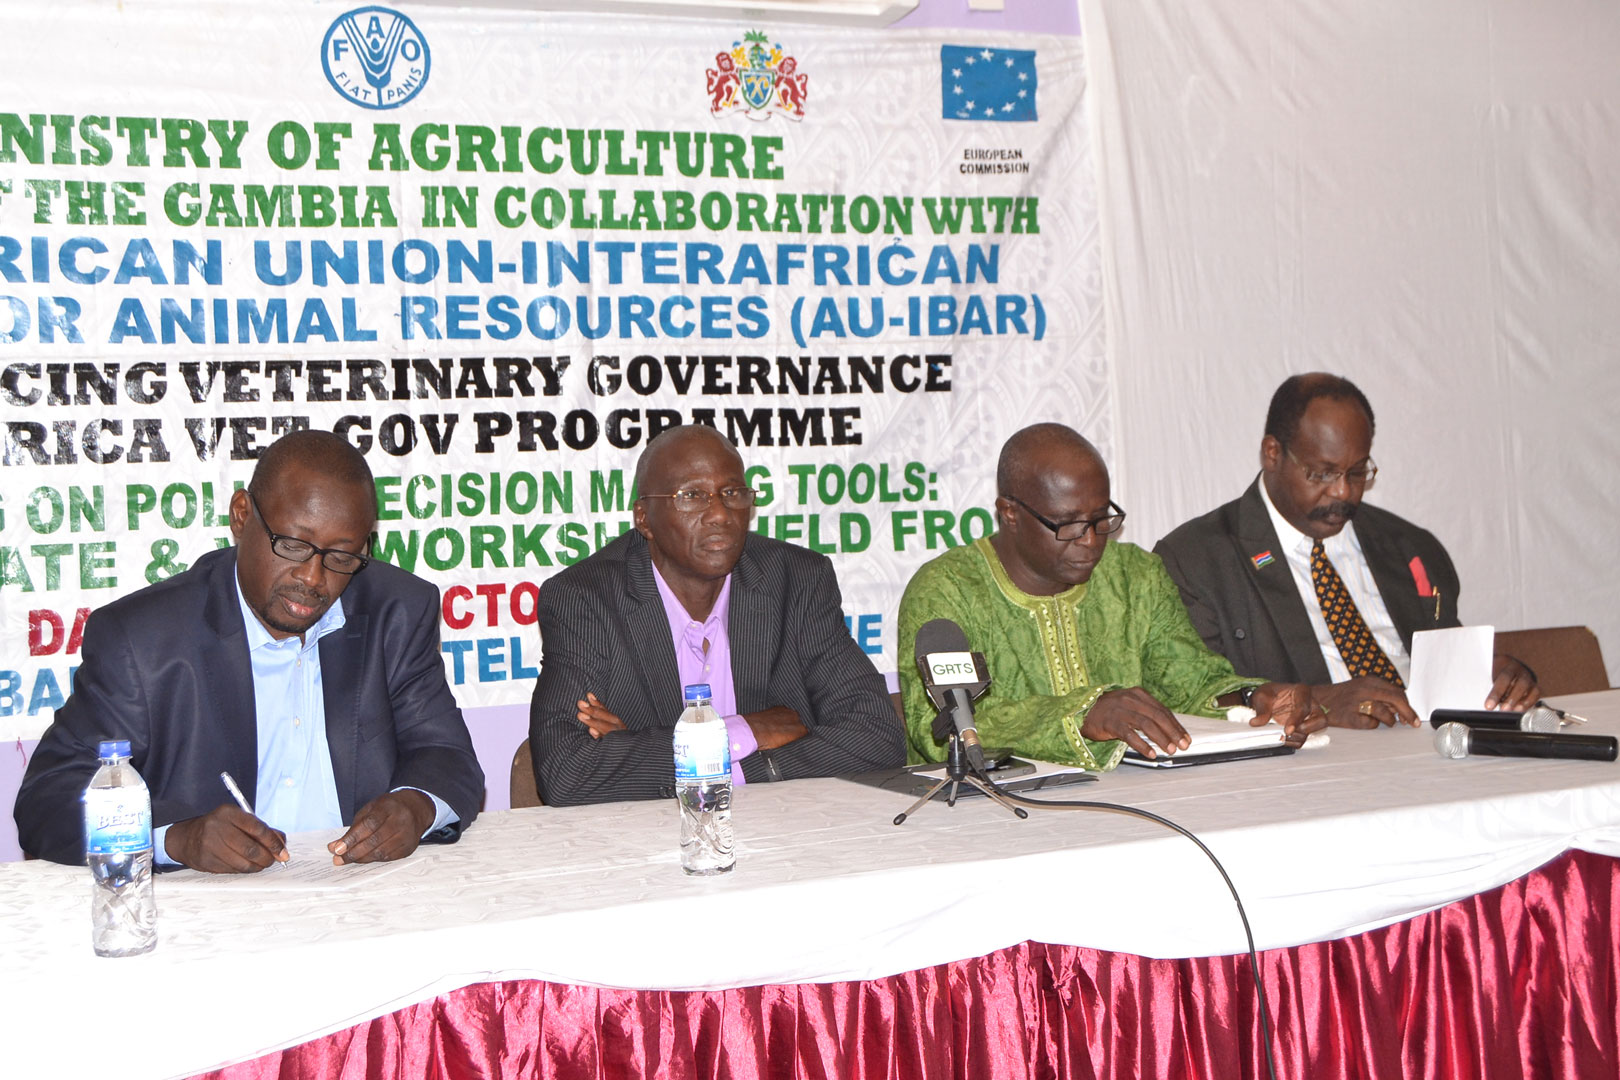 © 2015 AU-IBAR. From left to right: Dr Baboucarr Jaw (AU-IBAR), Mr Sheroffo Bojang, Permanent Secretary Ministry of Agriculture, Dr Duto Fofana, Director General of Livestock and Dr Henry Carrol, Chairman of the Policy Hub.